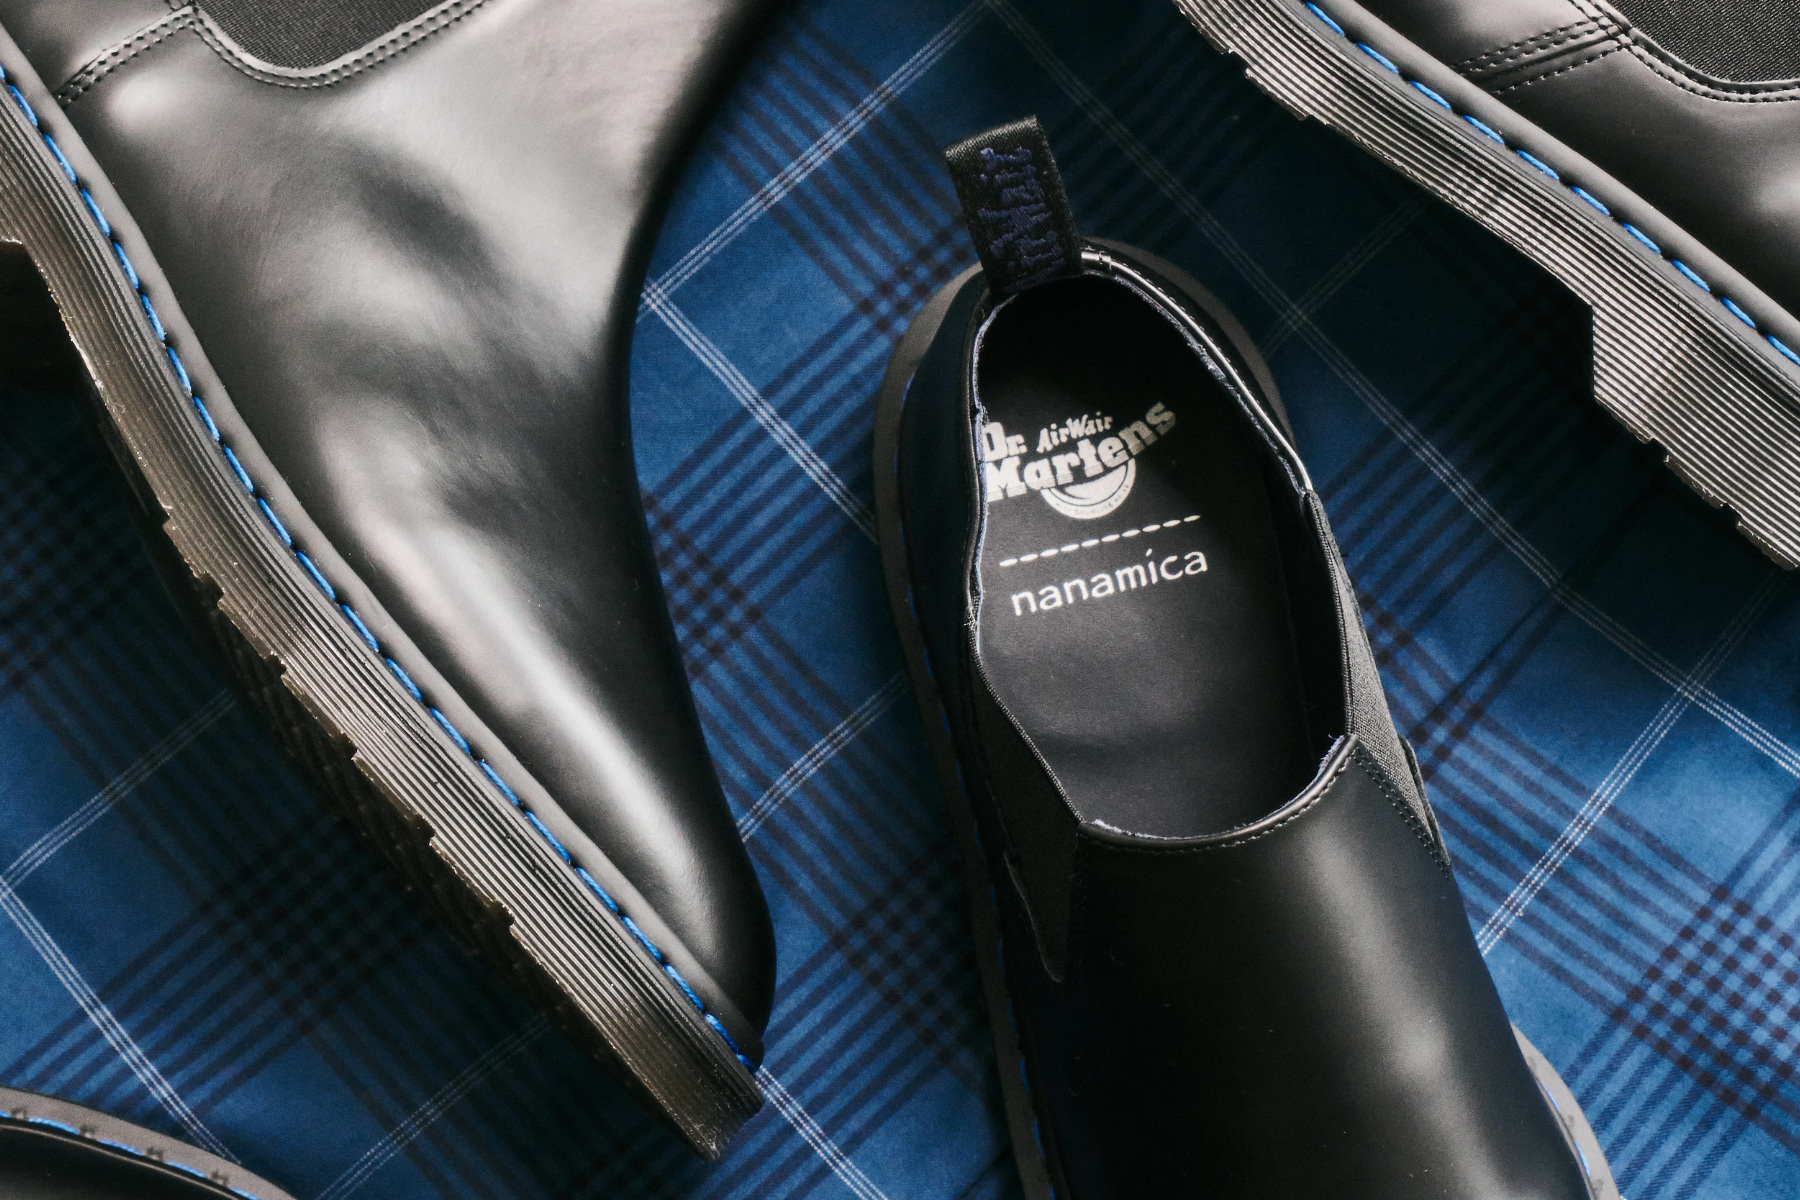 nanamica has revealed its fourth Dr. Martens collaboration for Fall/Winter 2023.